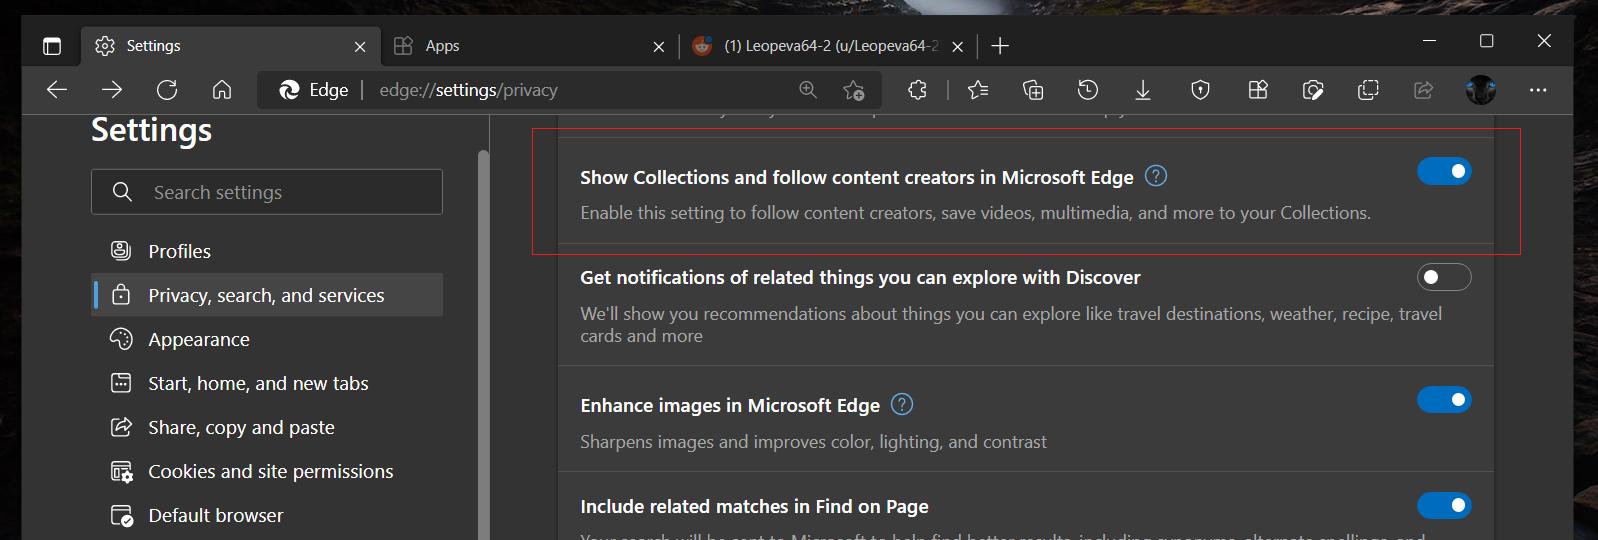 Show Collections and follow content creators in Microsoft Edge